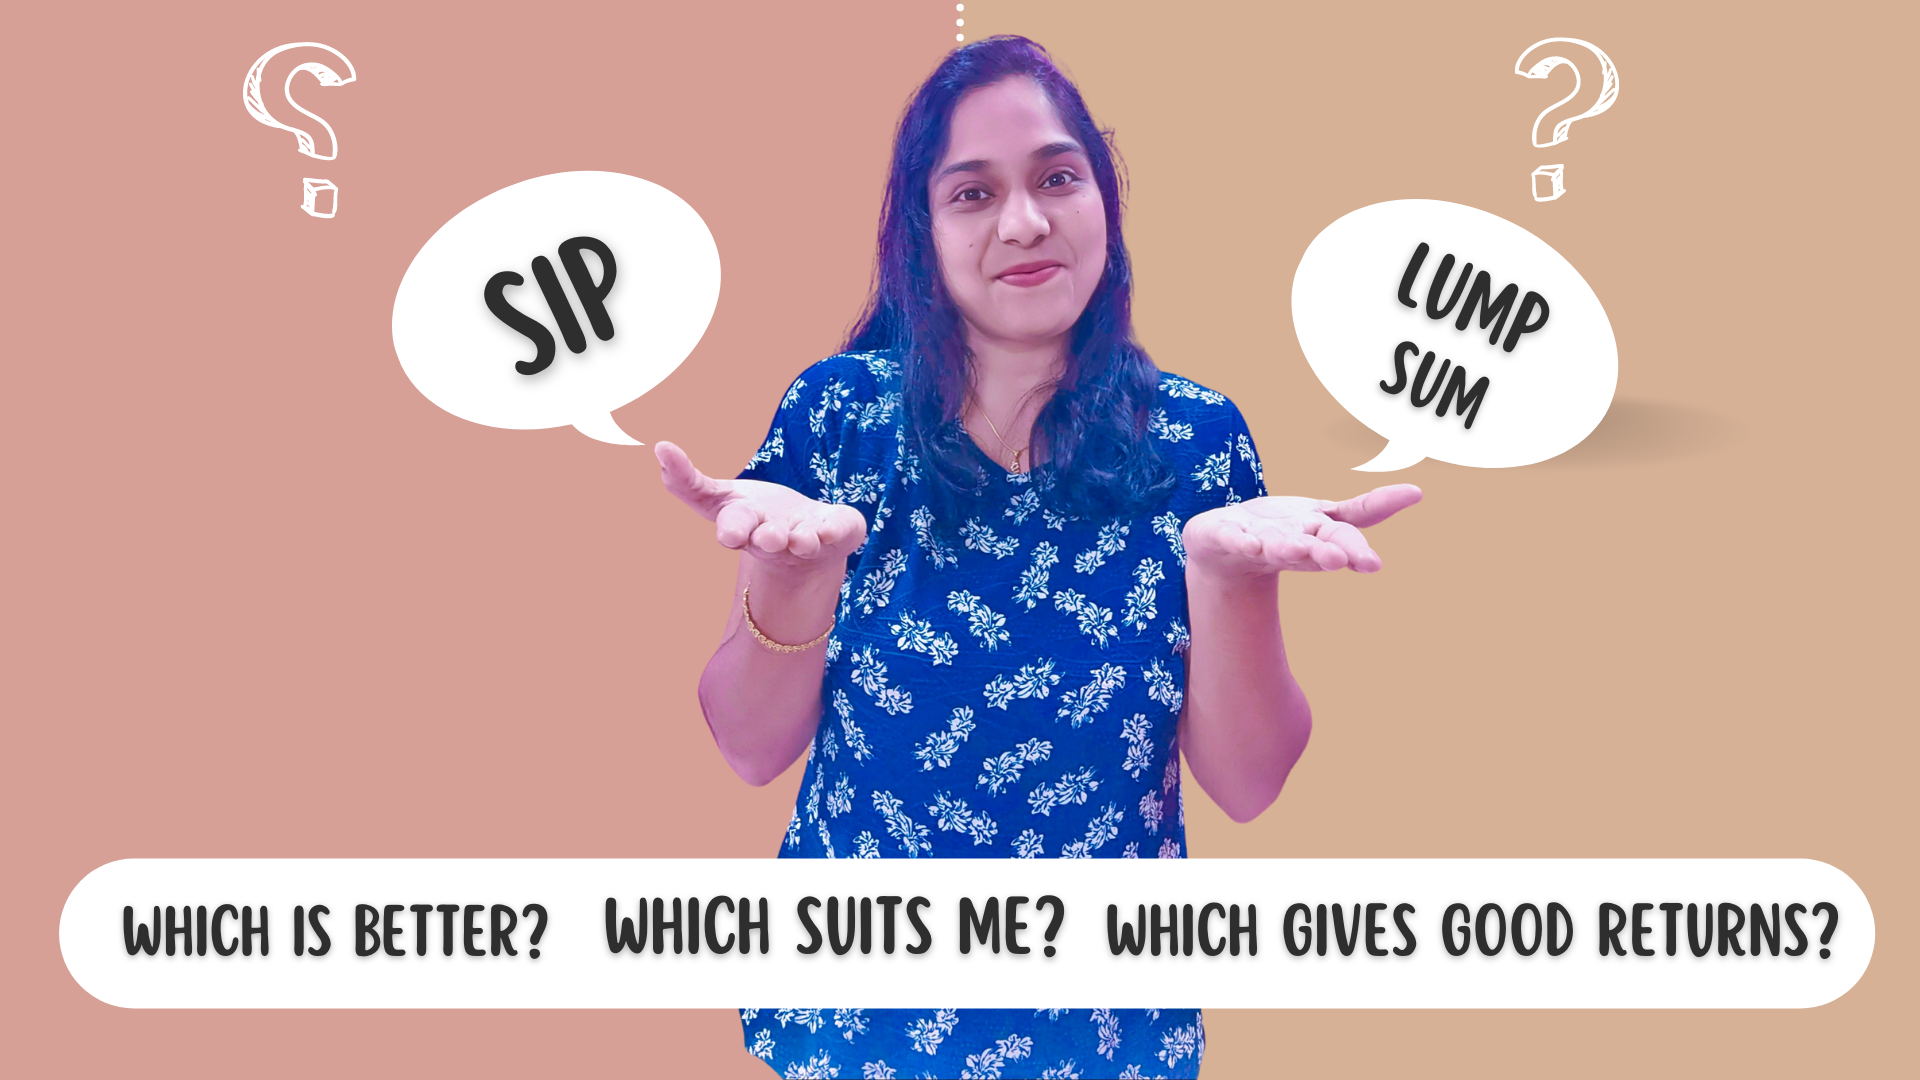 SIP or Lumpsum? Which Is Better? Which Gives Good Returns? Which Suits Me As An Investment Option?